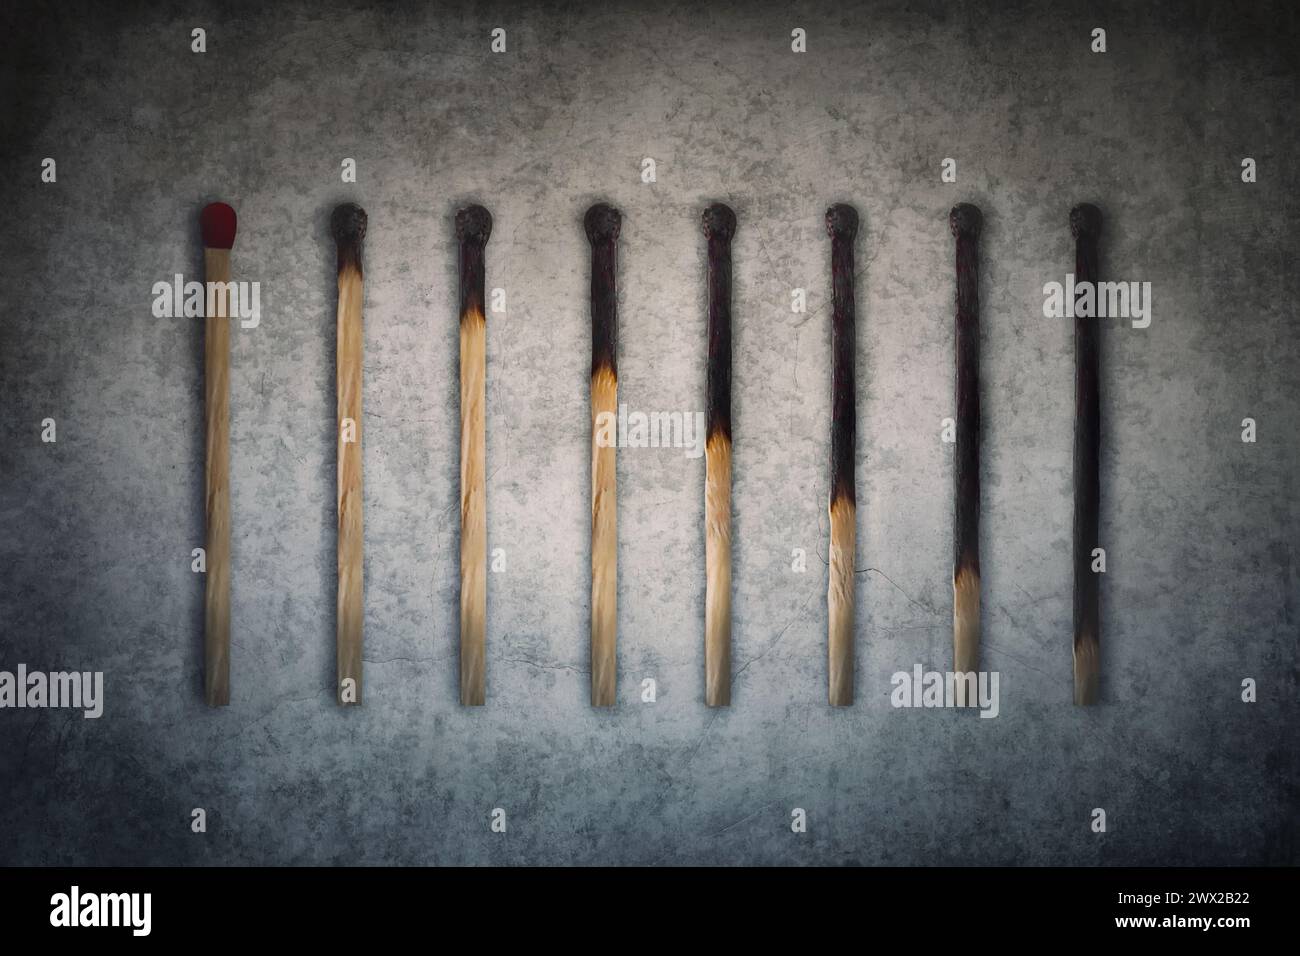 Match sticks burnt at different stages arranged in shape of a decreasing graph or chart. Business decrease conceptual background Stock Photo